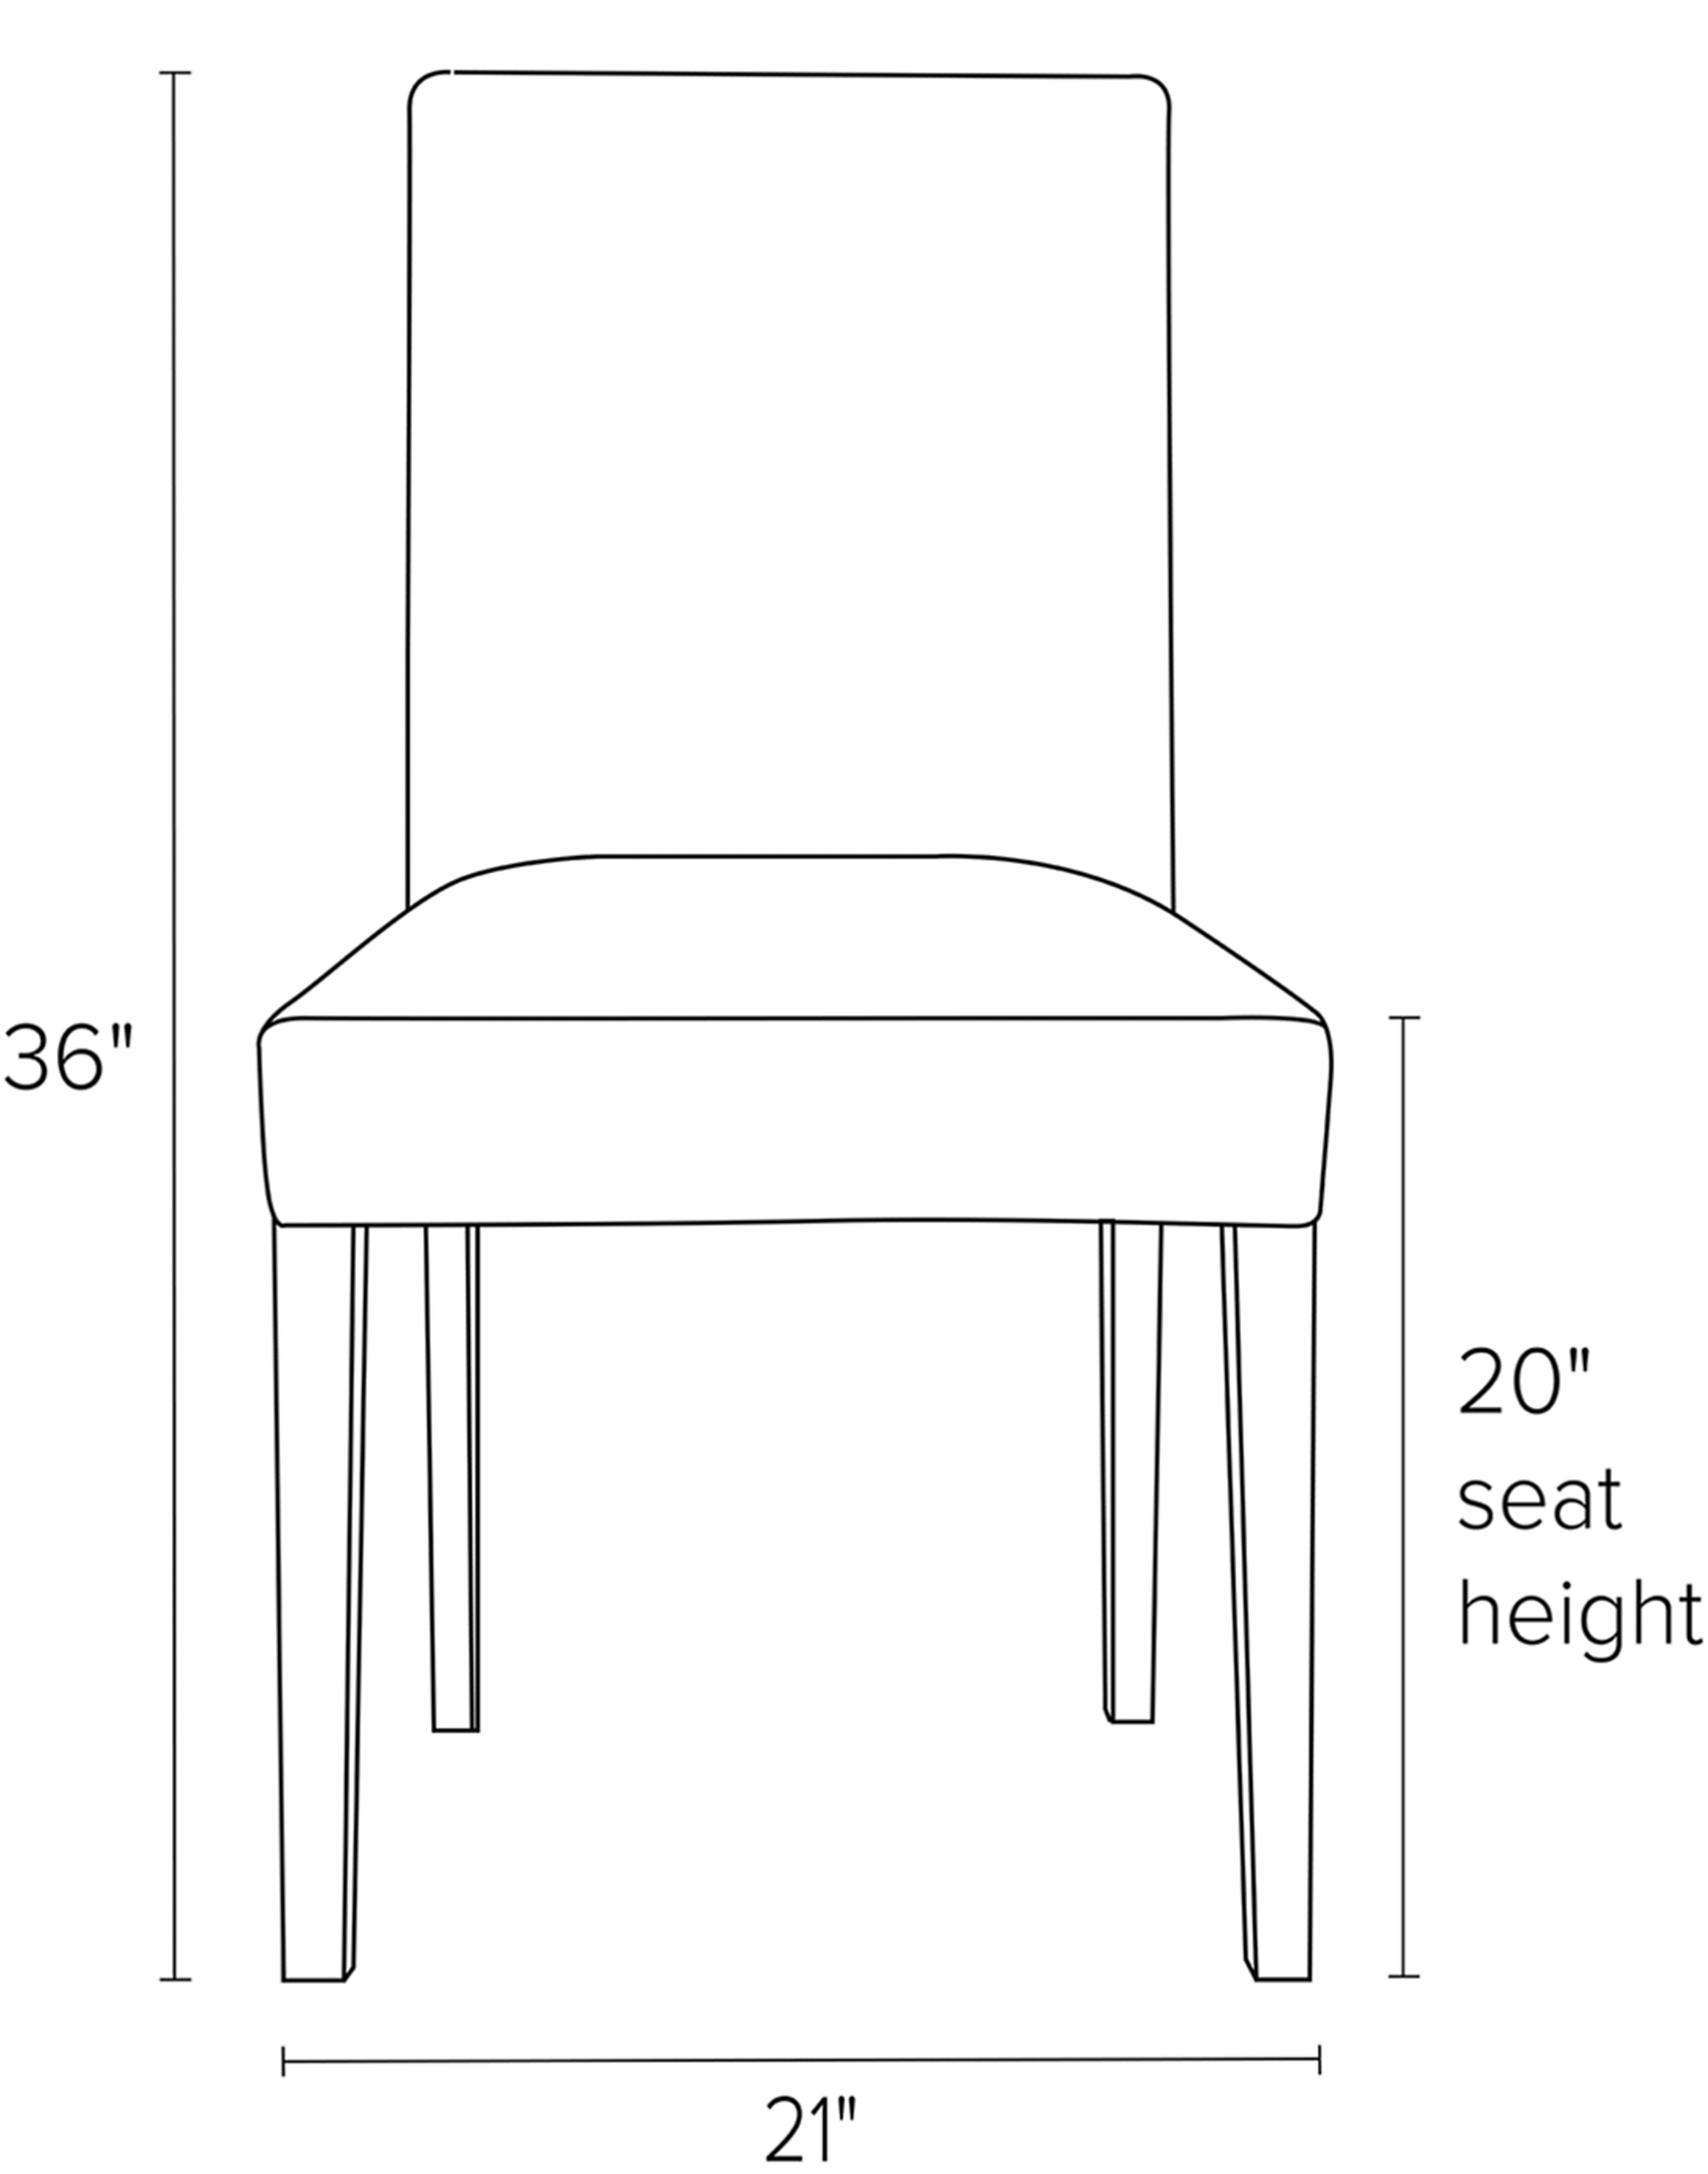 Front view dimension illustration of Peyton side chair.